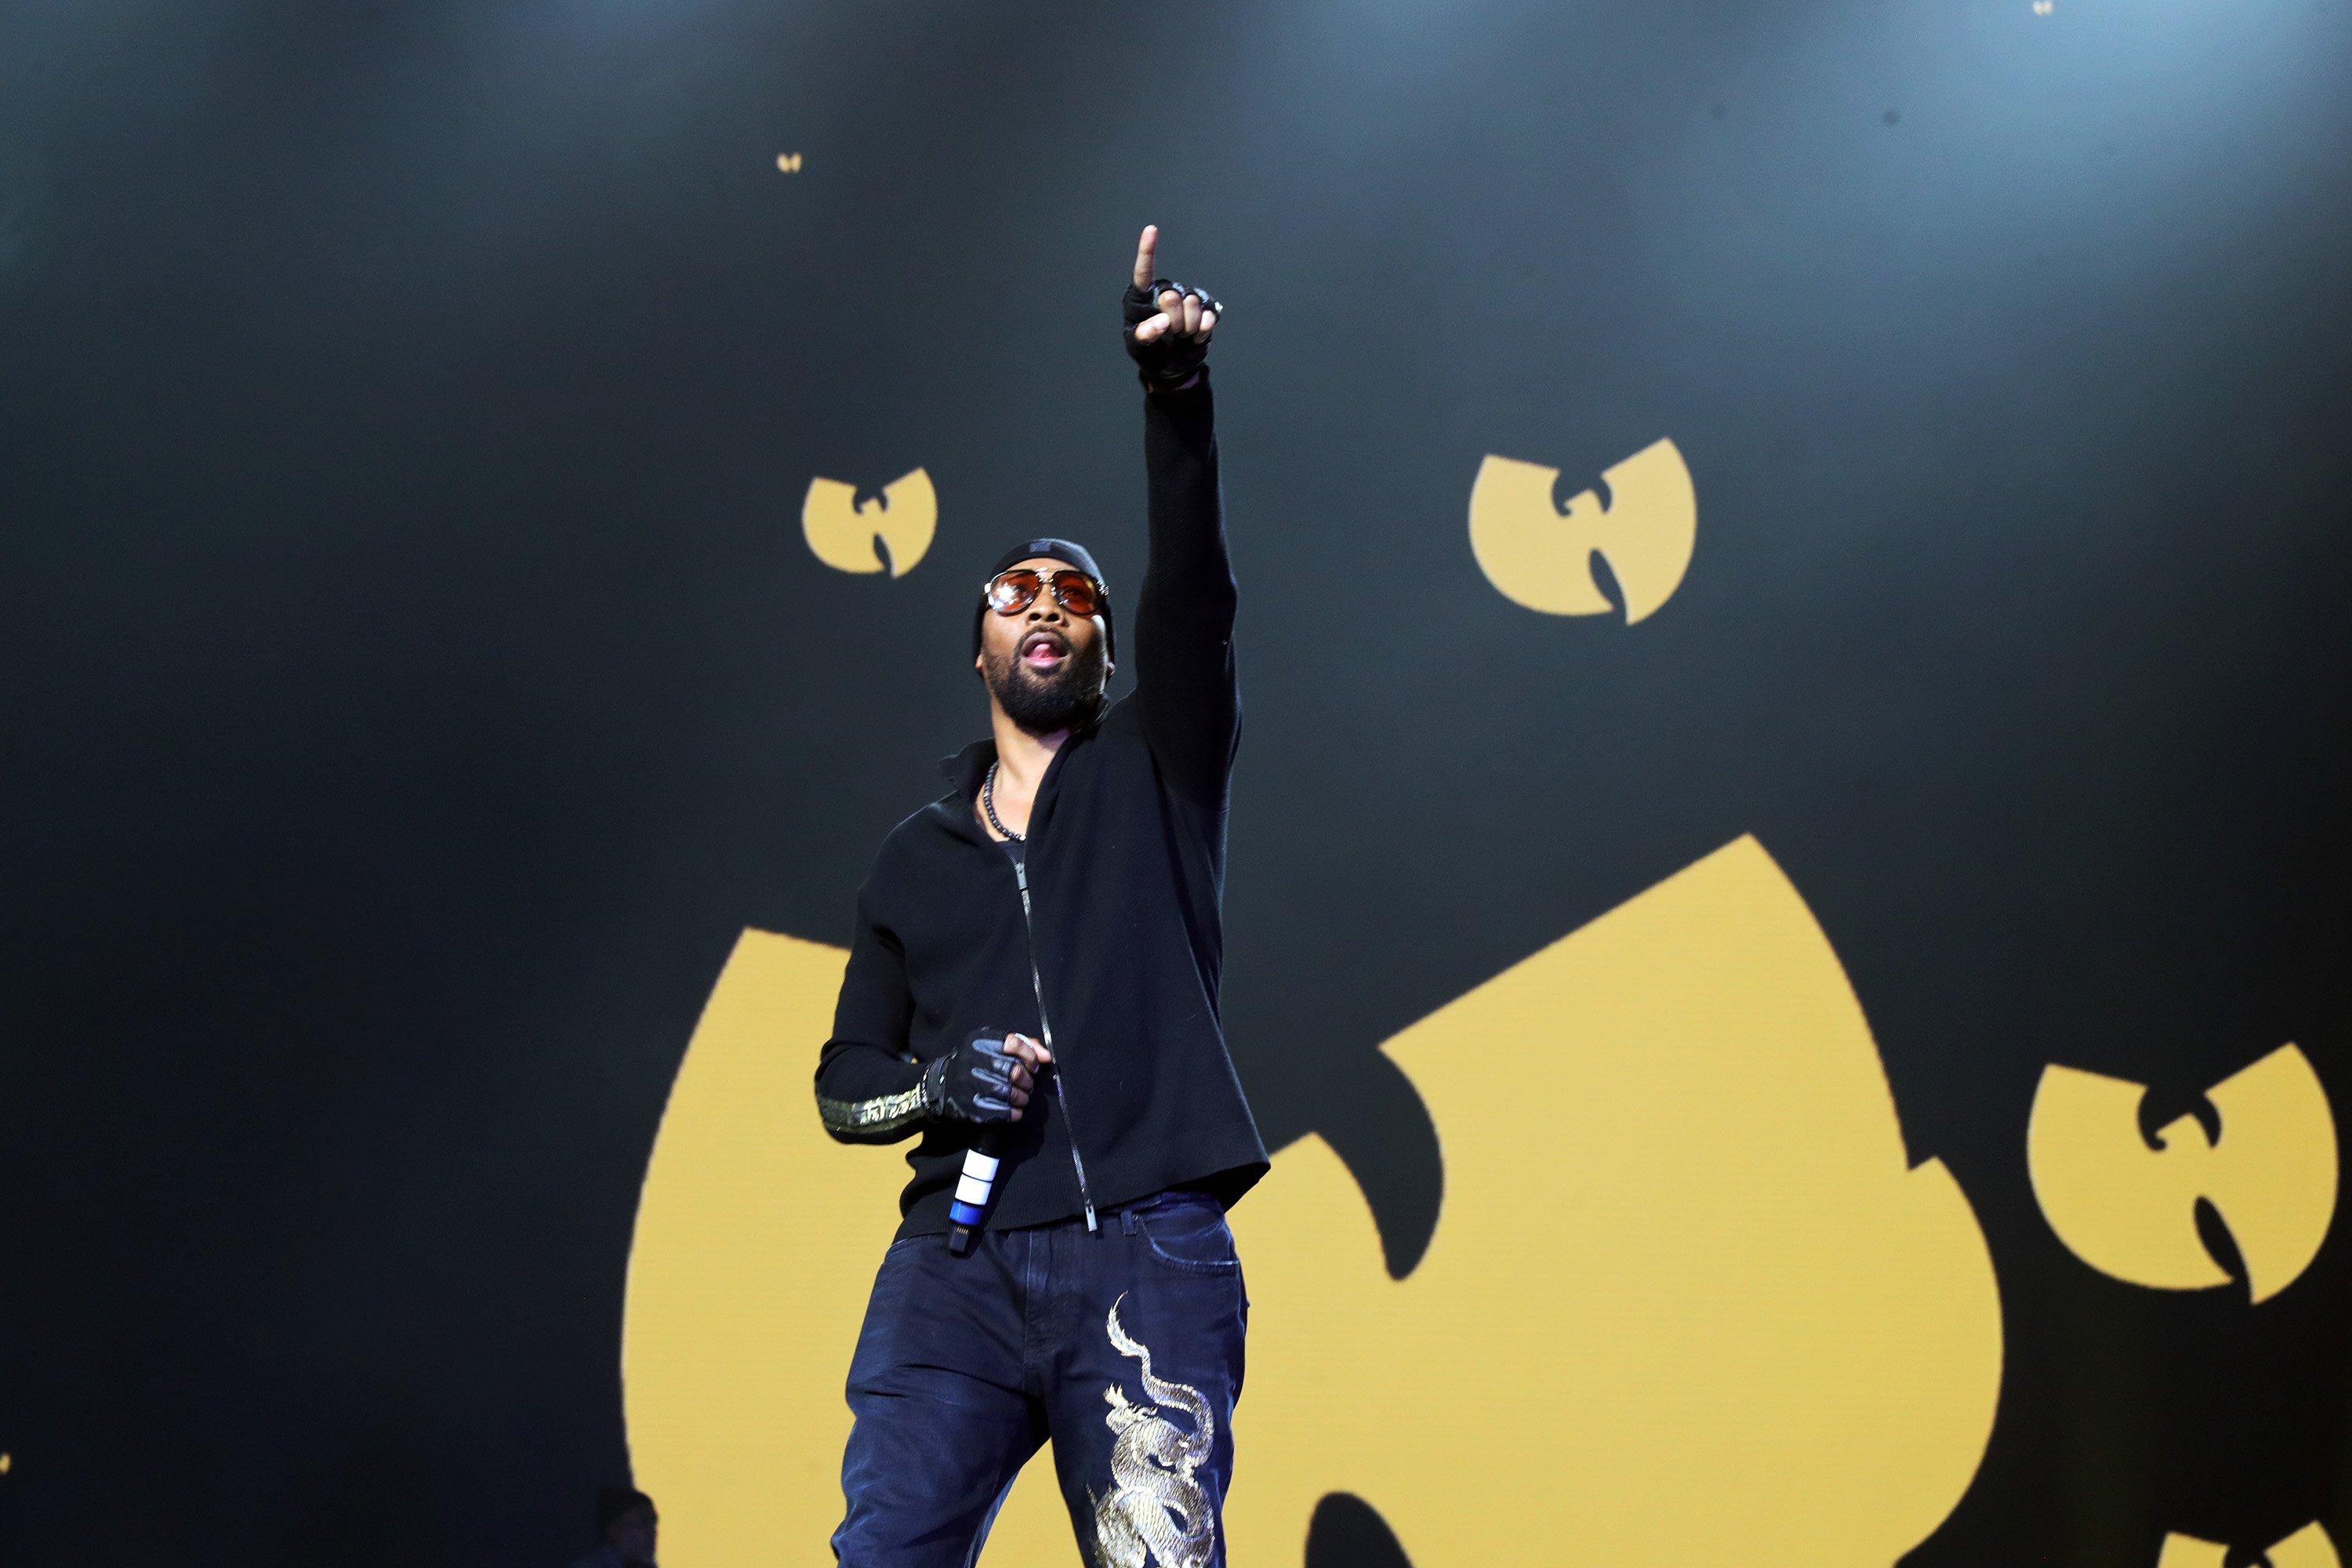 RZA performing with his hand up